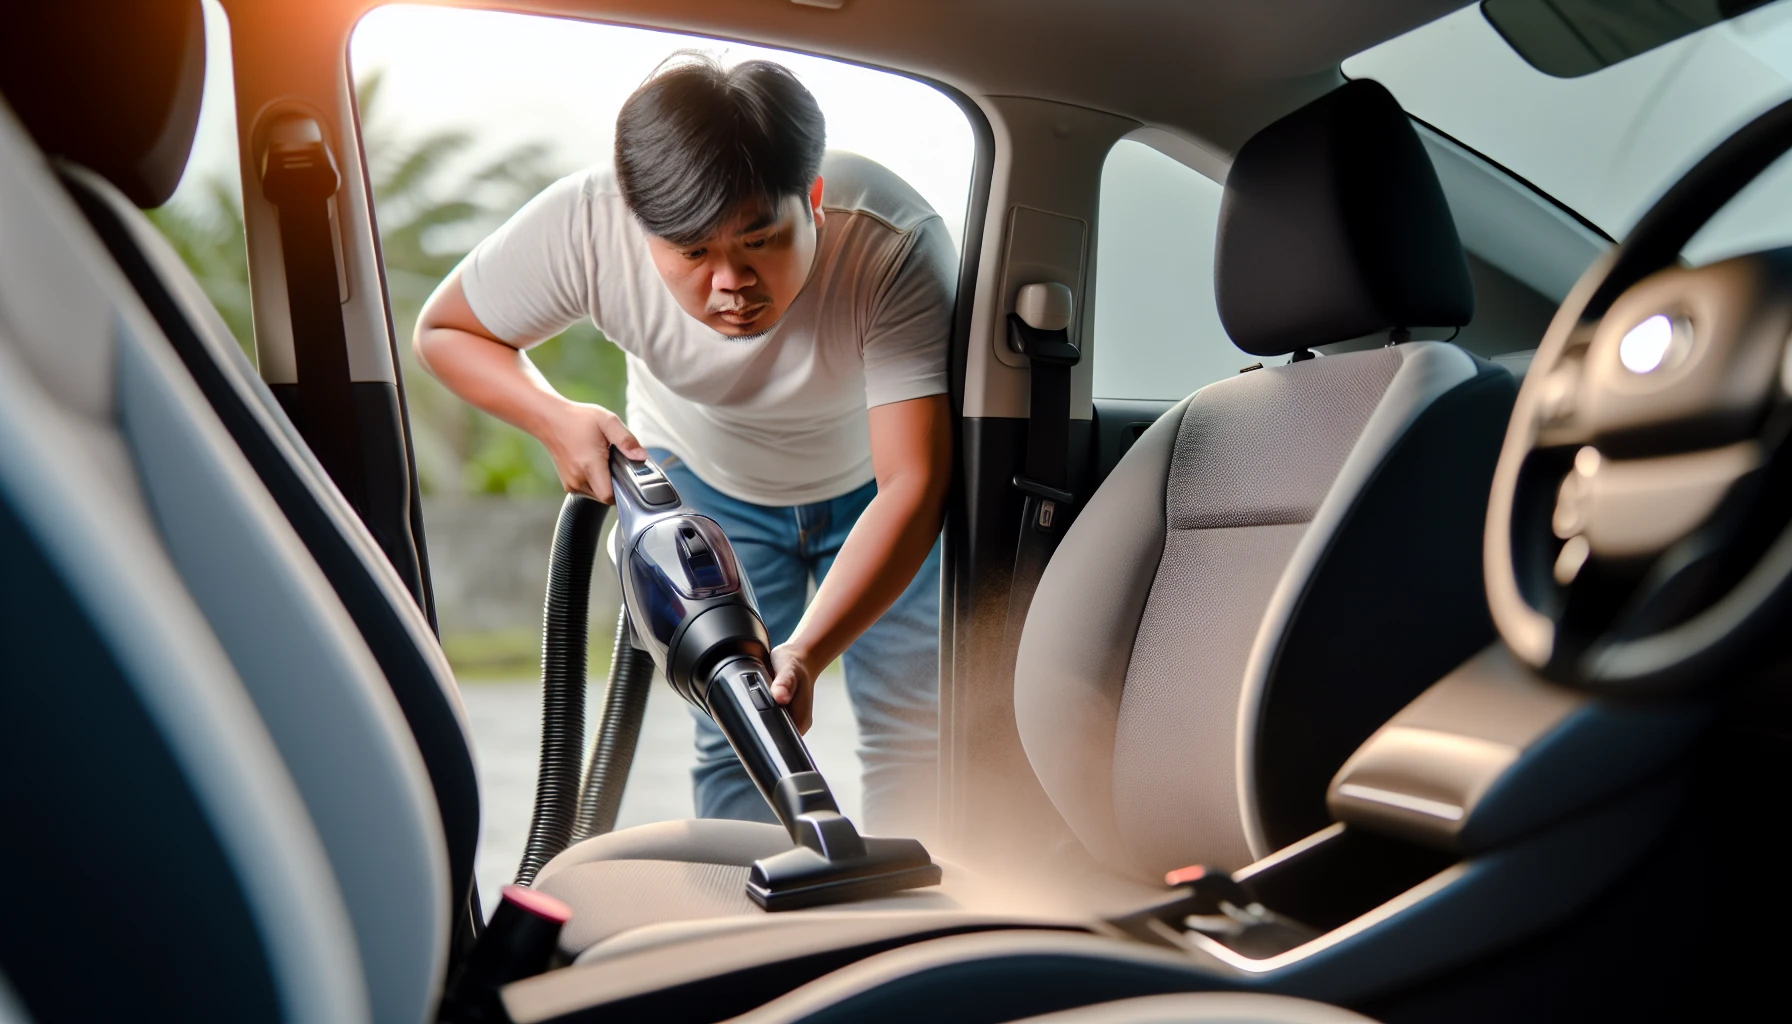 Photo of a person using a vacuum cleaner to clean the vehicle's interior for optimal air quality